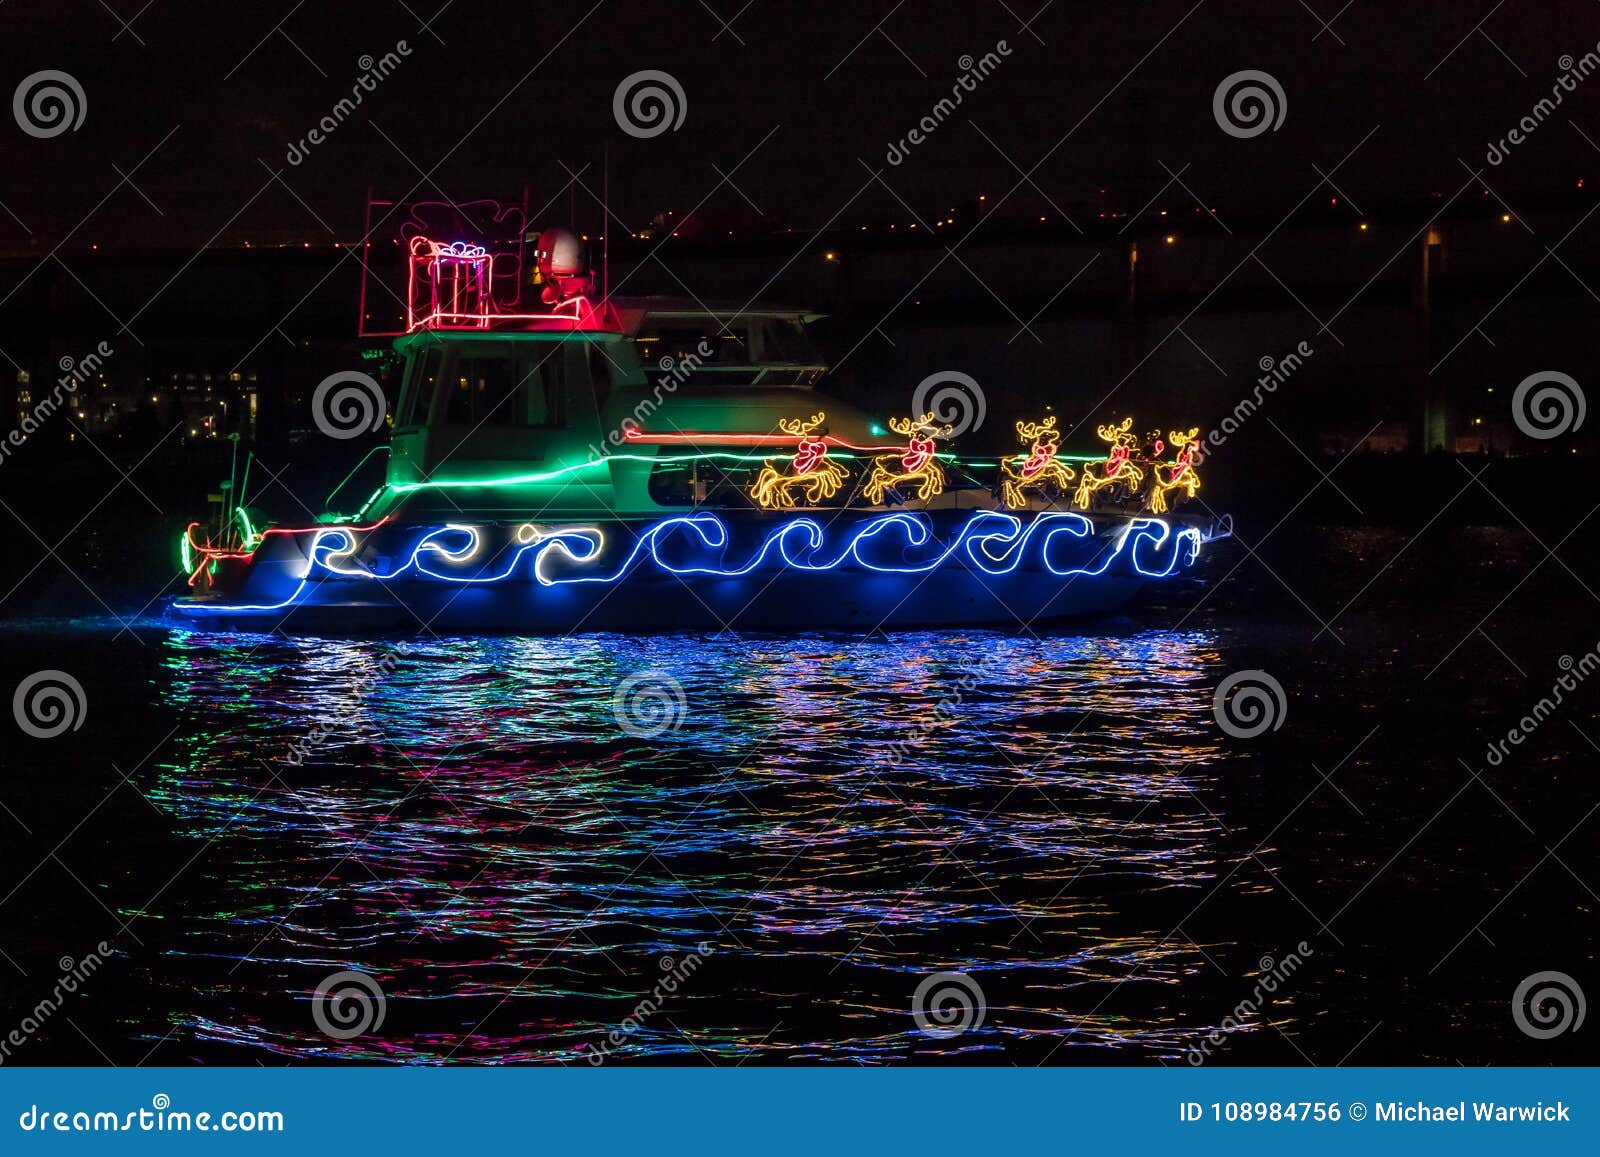 boat adorned with christmas holiday lights, santa claus sleigh and reindeer and reflection in the water.